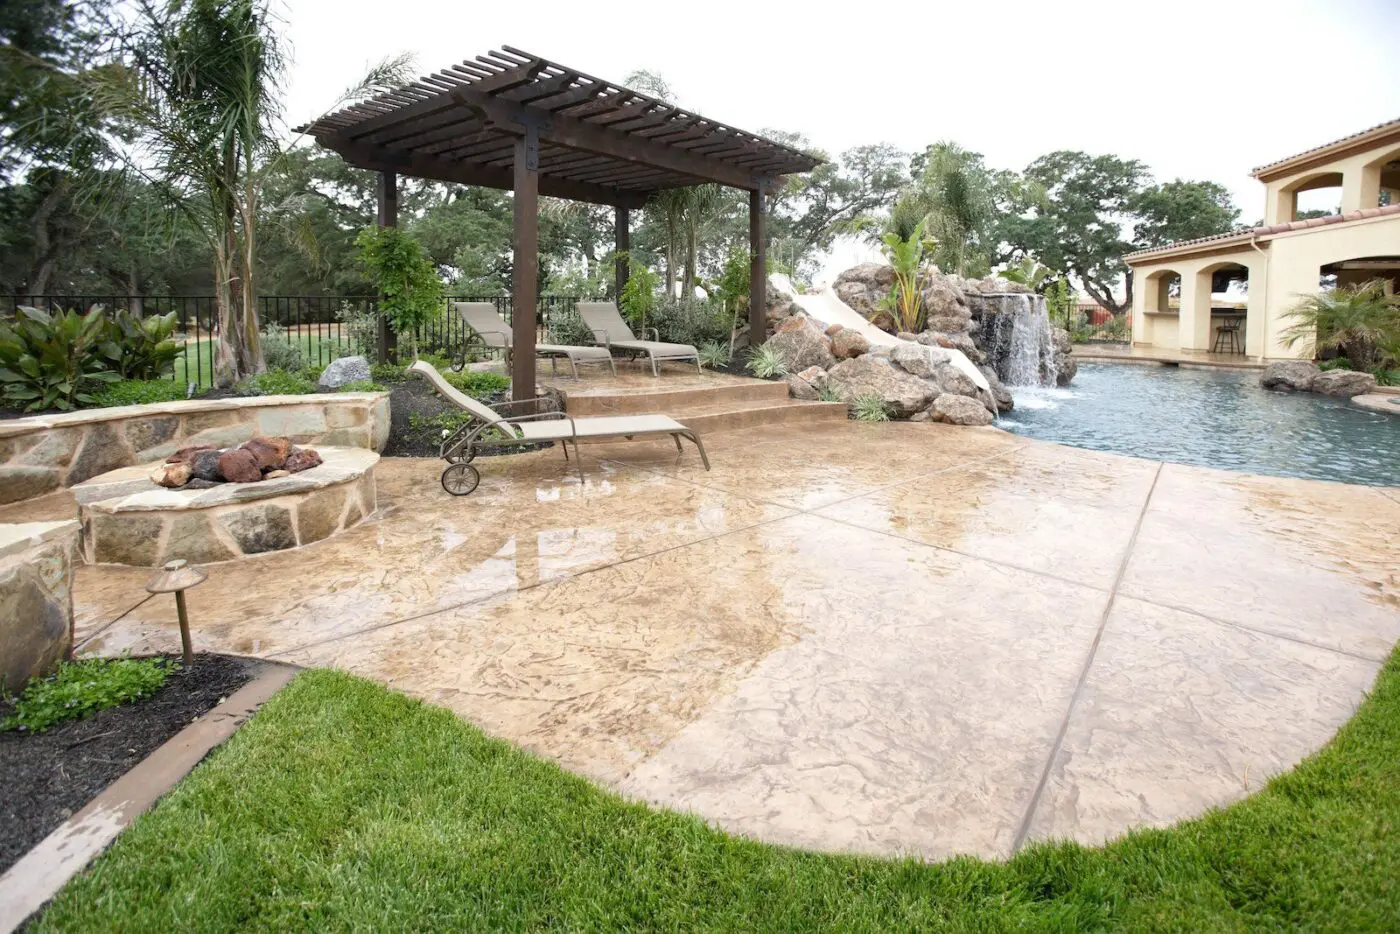 A luxurious backyard in Reno featuring a swimming pool with a waterfall, two lounge chairs under a wooden pergola, and a stone fire pit. The stamped concrete pool decks complement the lush landscaping, offering a serene and elegant outdoor living space.